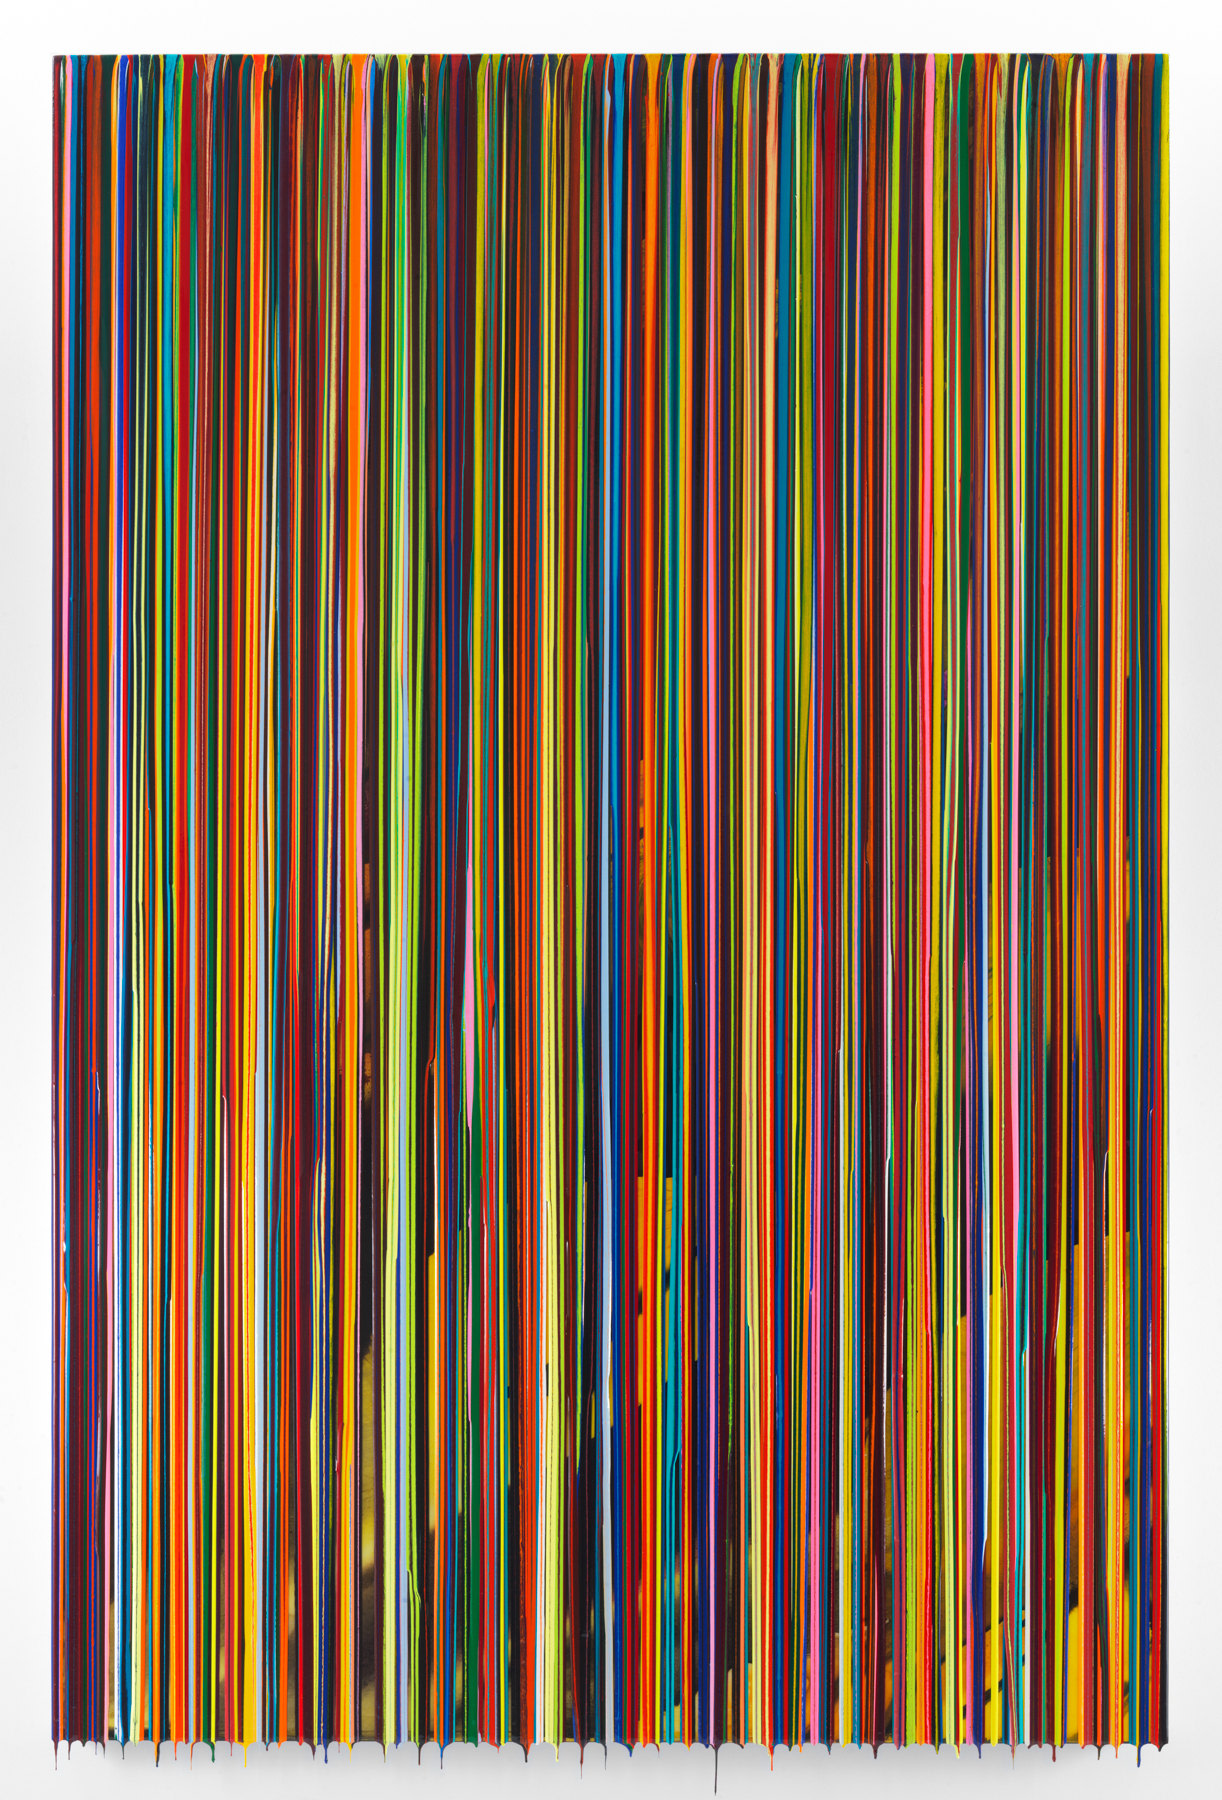 FROMTHEOUTLYINGDISTRICTS, 2016, Epoxy resin and pigments on wood, 90 x 60 inches, 228.6 x 152.4 cm, AMY#28453